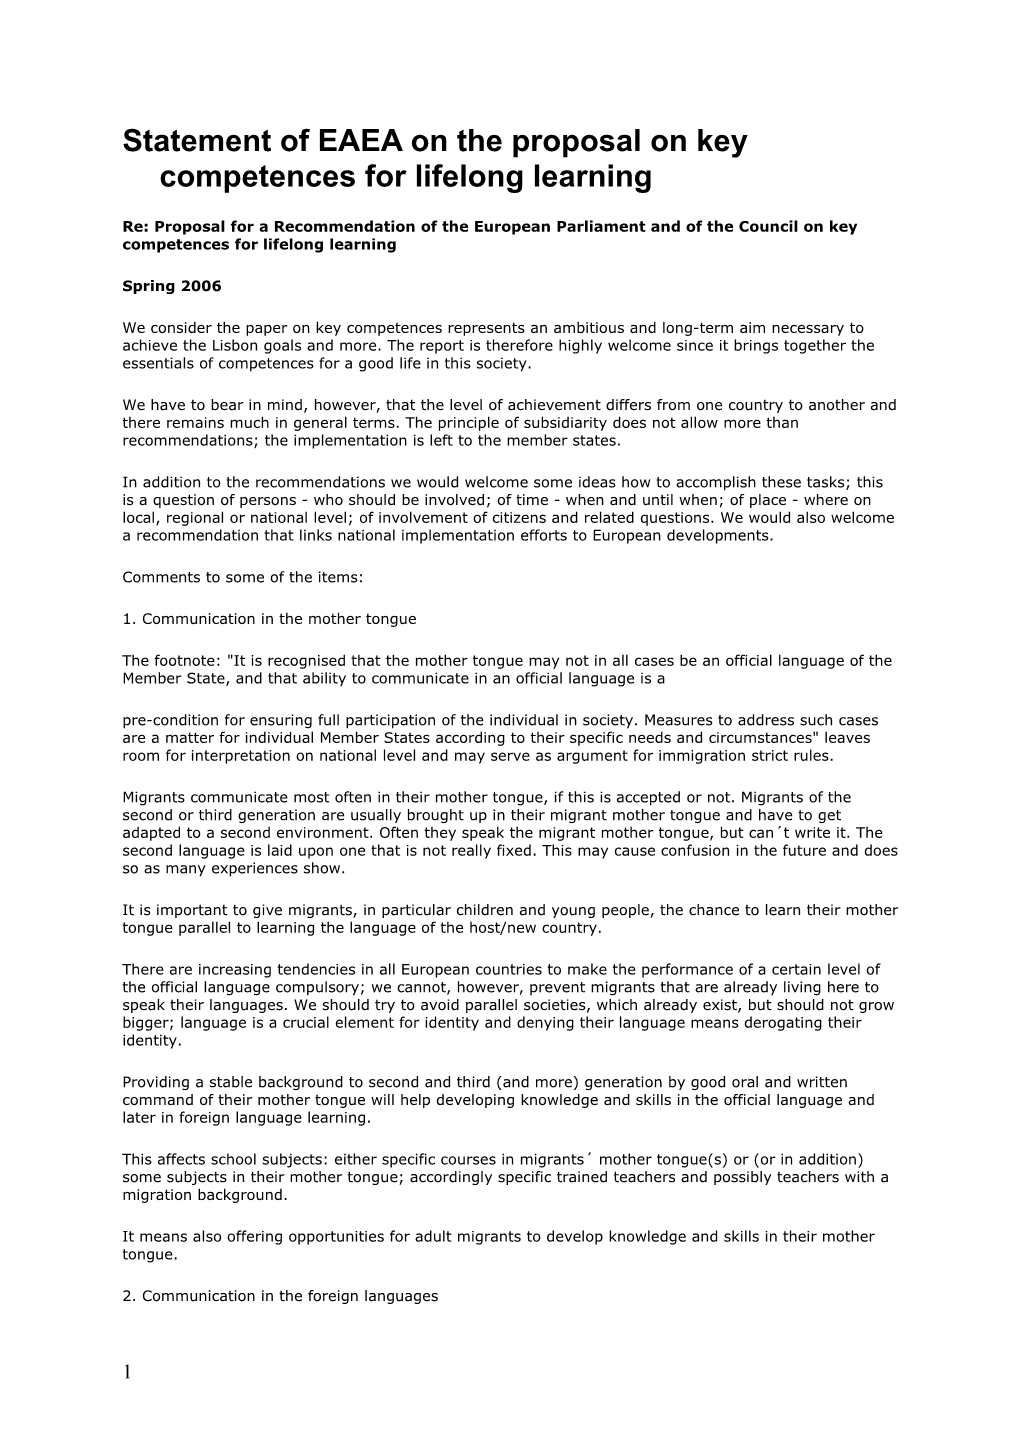 Statement of EAEA on the Proposal on Key Competences for Lifelong Learning